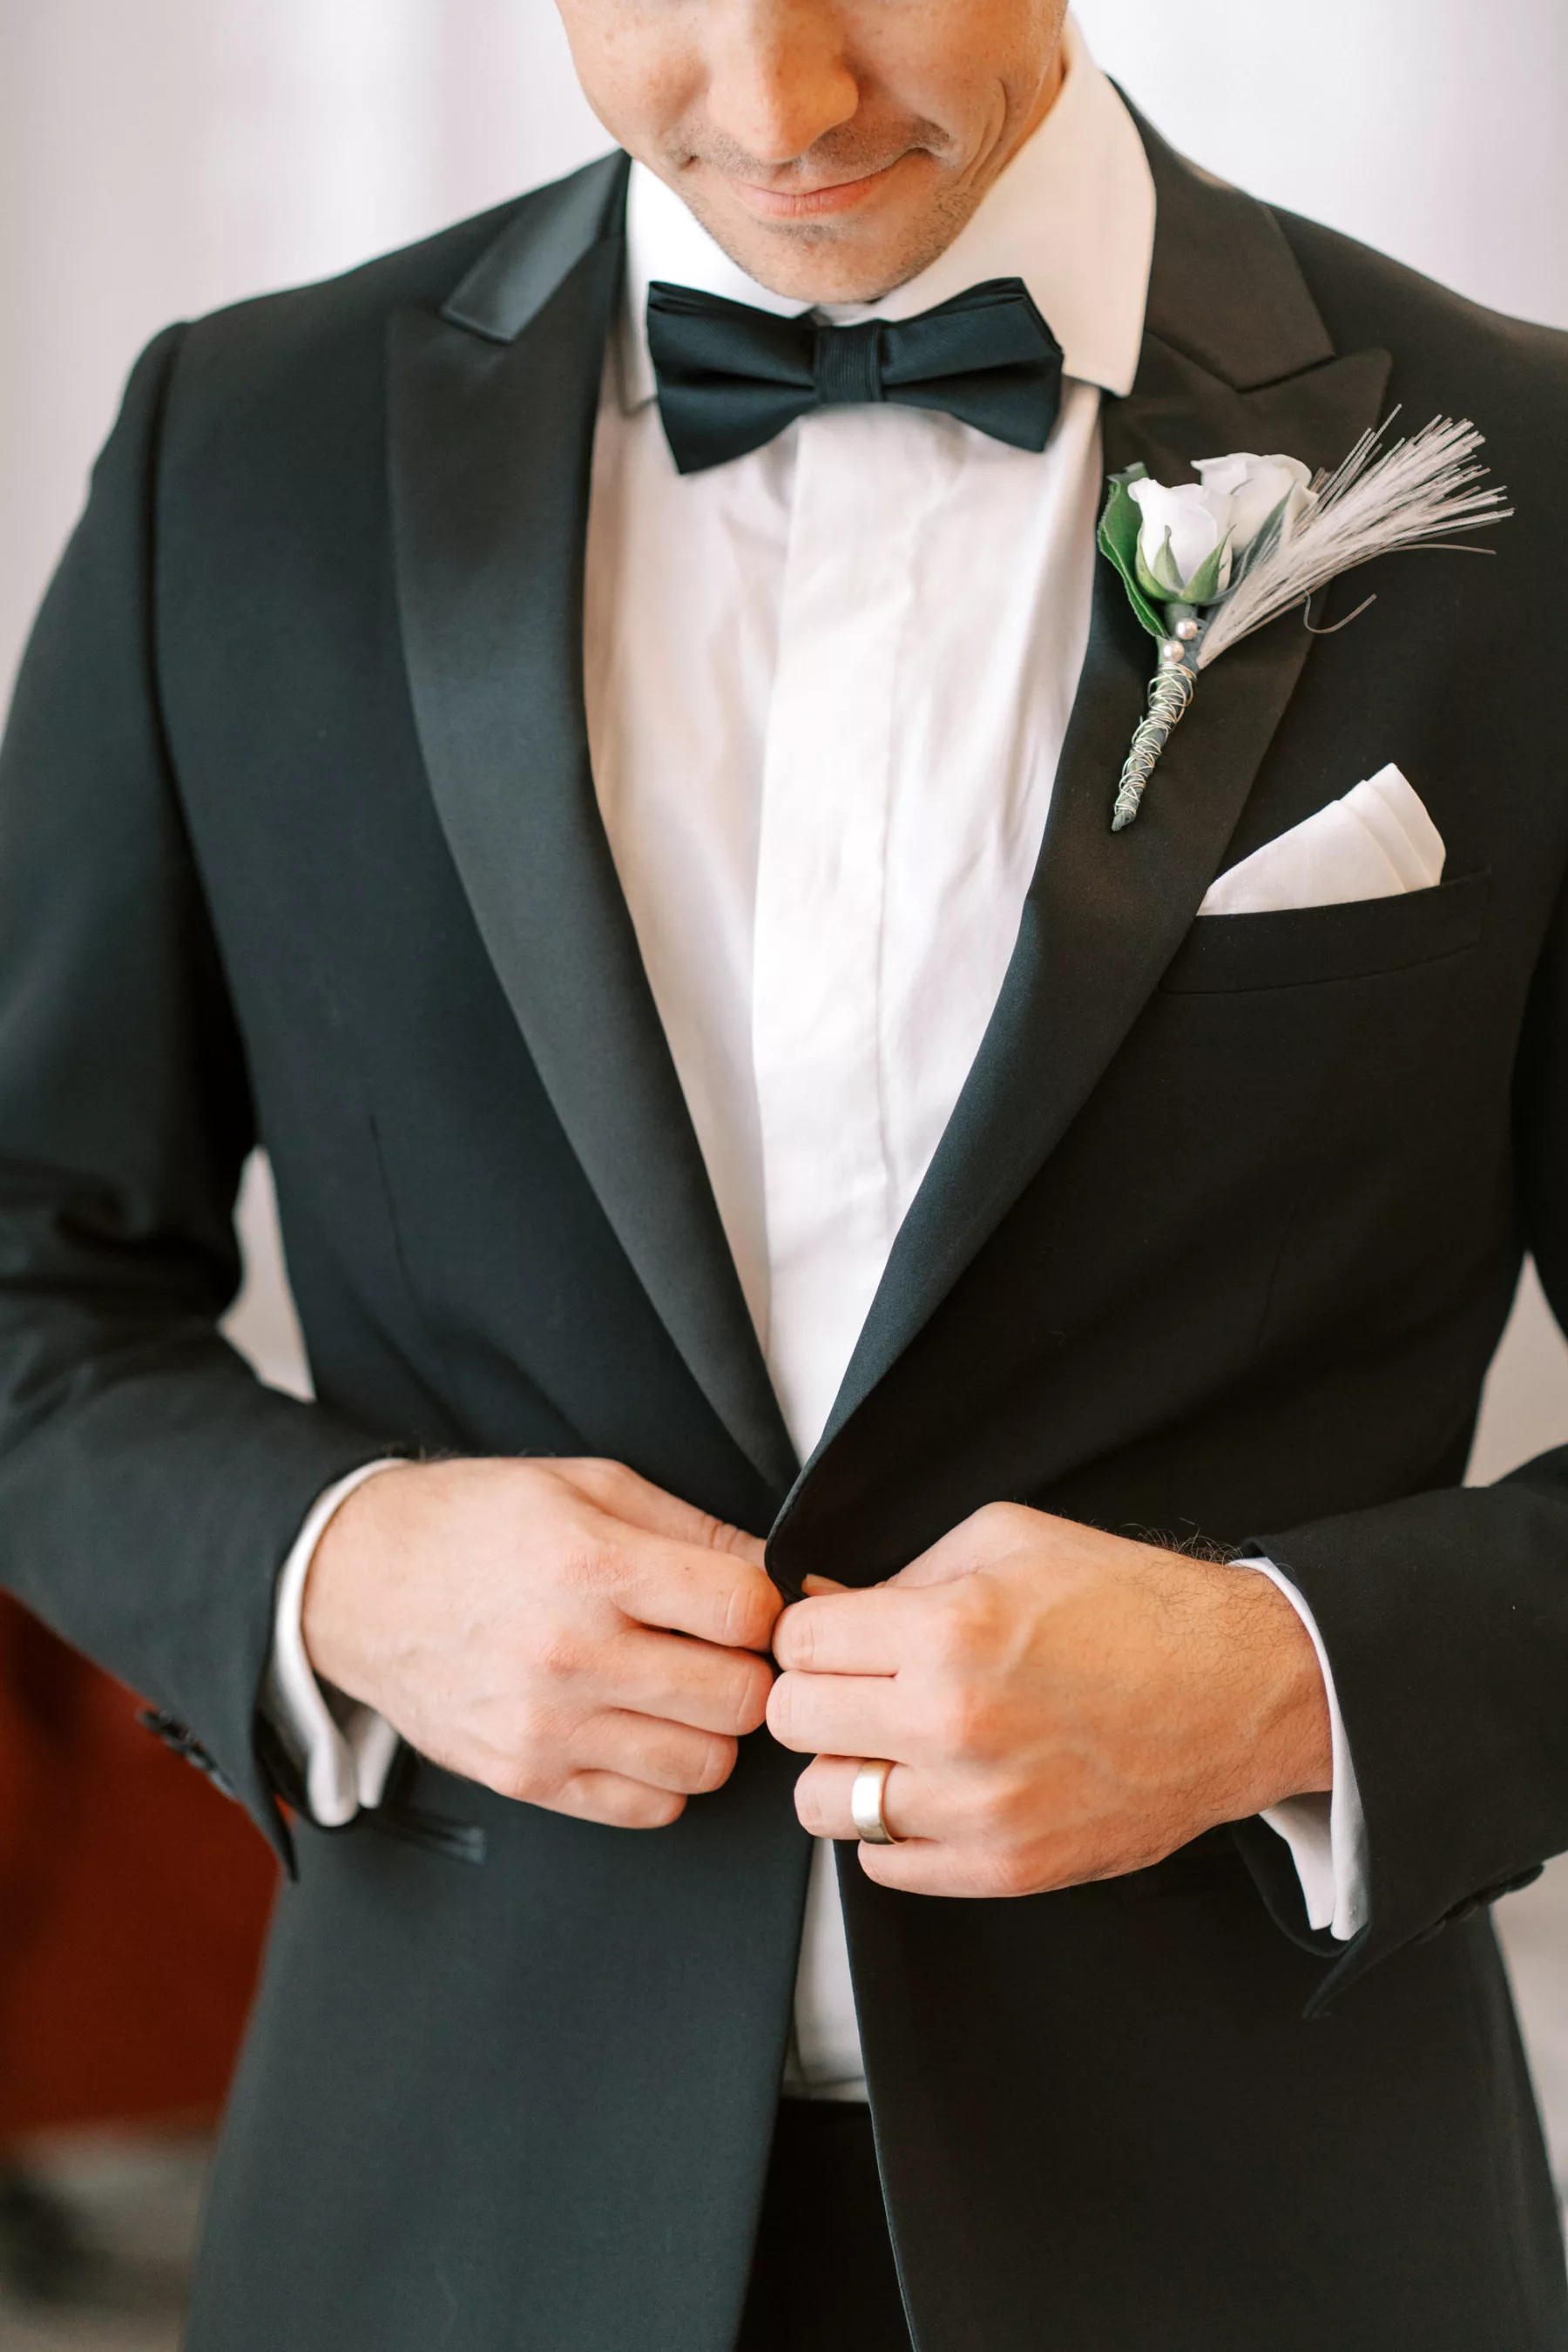 Black Tuxedo With Bow-tie Groom's Wedding Day Attire Inspiration | White Rose and Feather Great Gatsby Inspired Boutonniere Ideas | Men's Attire Suitshop